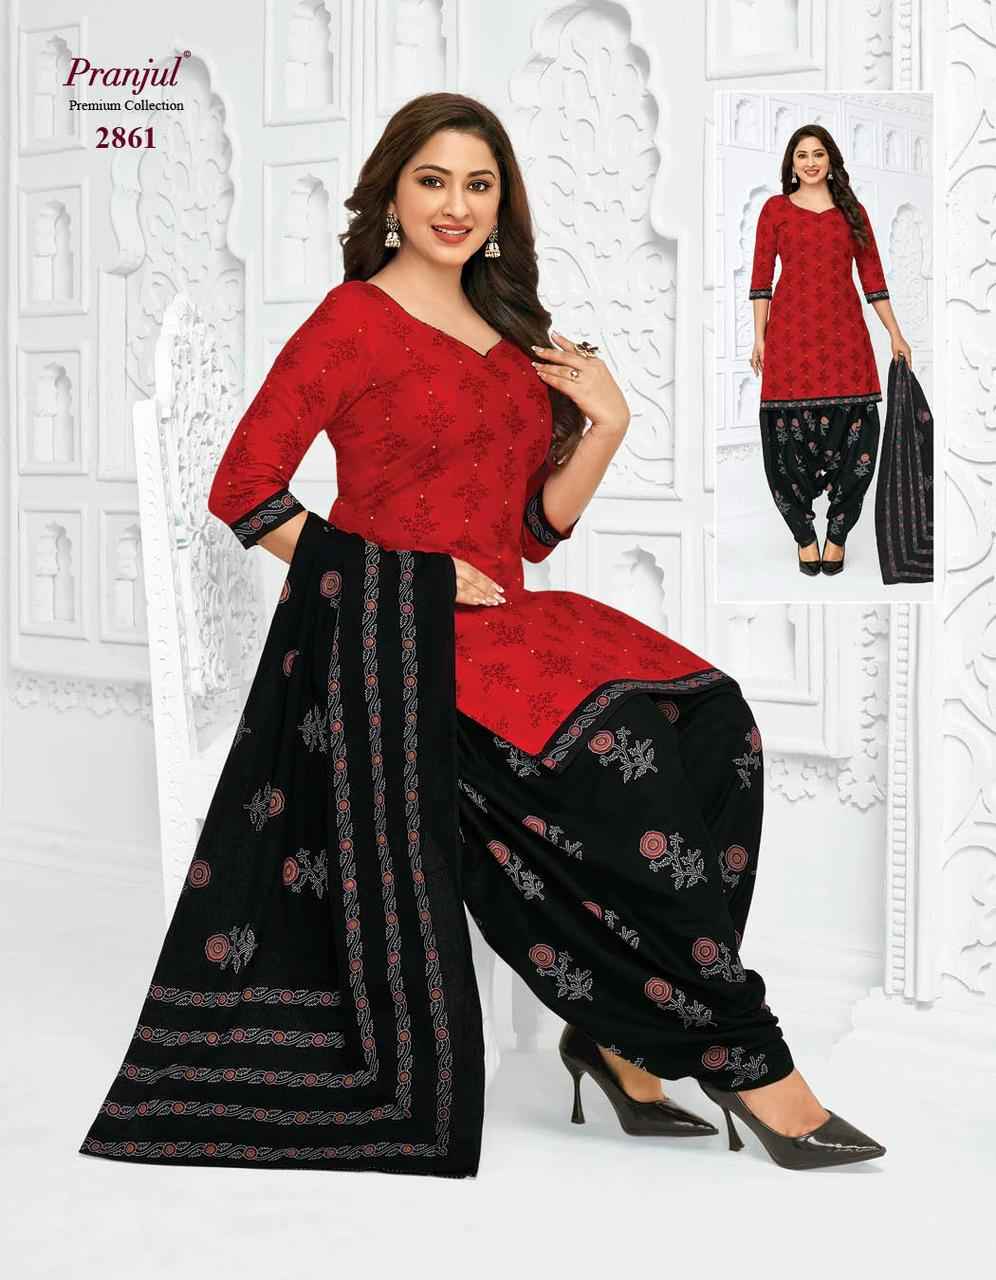 Red and Black Pranjul 3/4th Cotton Churidar Suit, 1 Set Includes: 1  Salwar,1 Kameez and Dupatta at Rs 365/set in Chennai